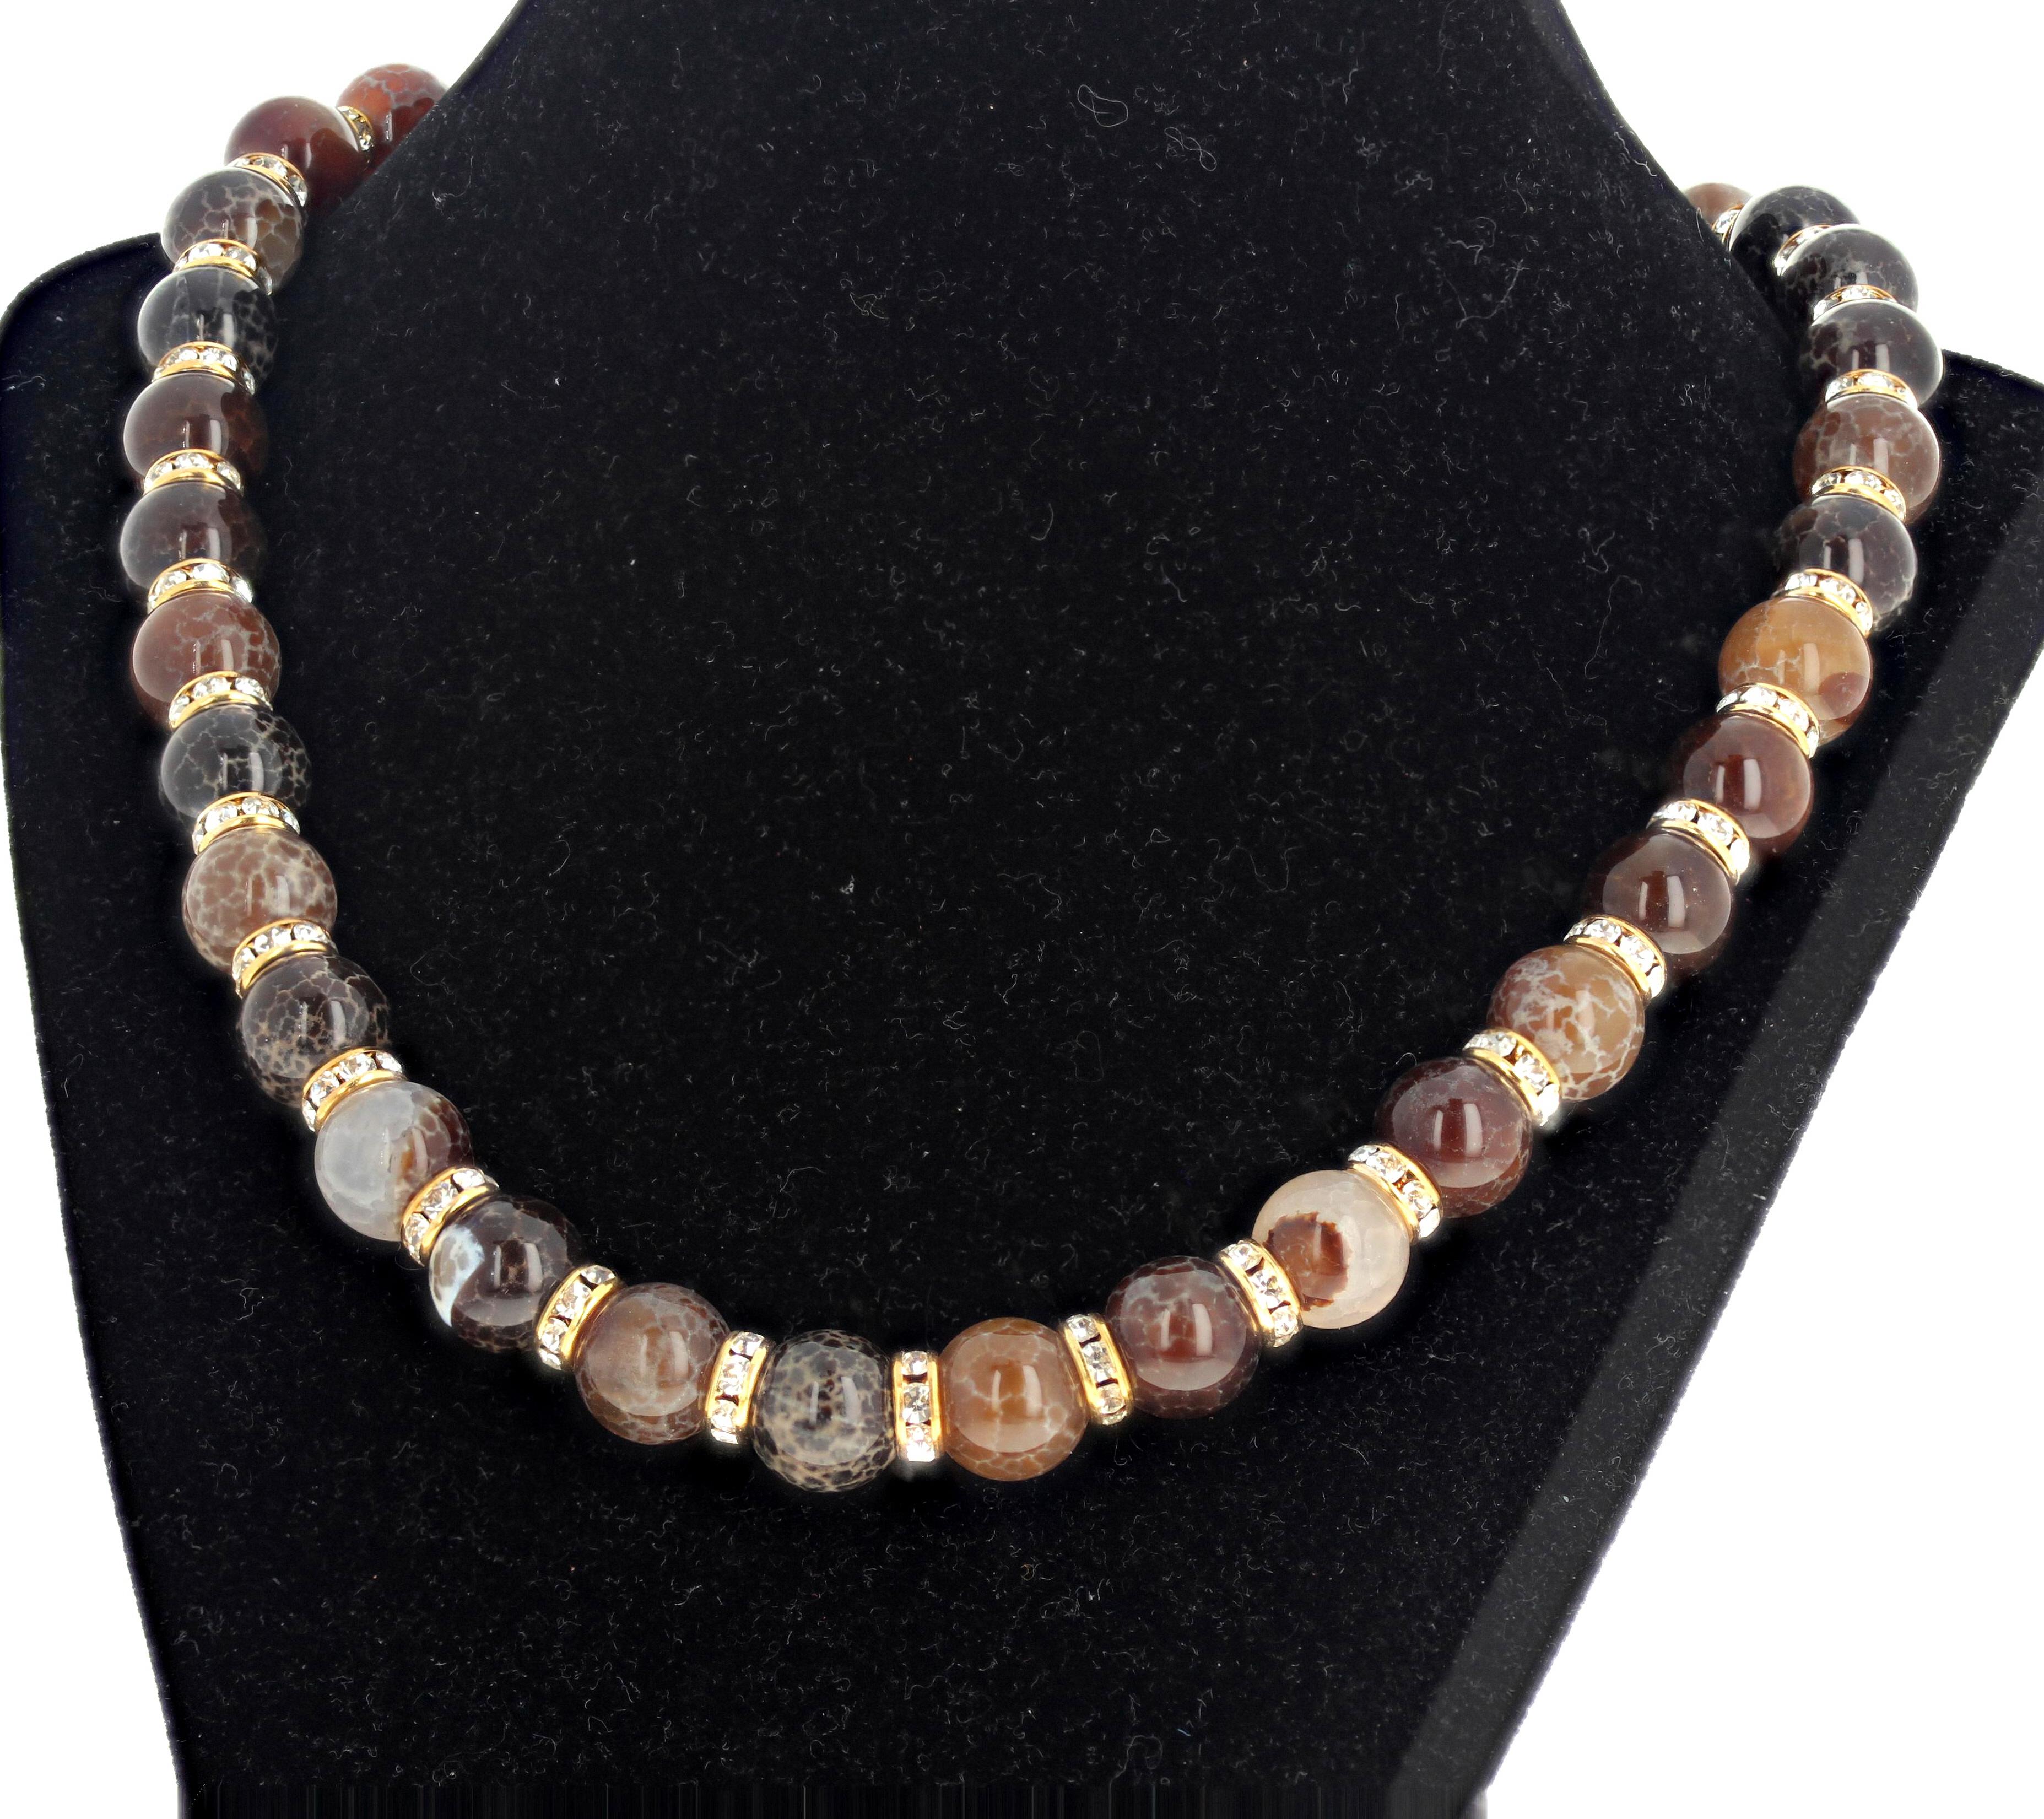 These beautiful natural Agates of different colors are approximately 12mm to 13mm round and highly polished so they glow and sparkle.  They are enhanced with goldy sparkling rondels.  This necklace is 20 inches long and the clasp is an easy to use